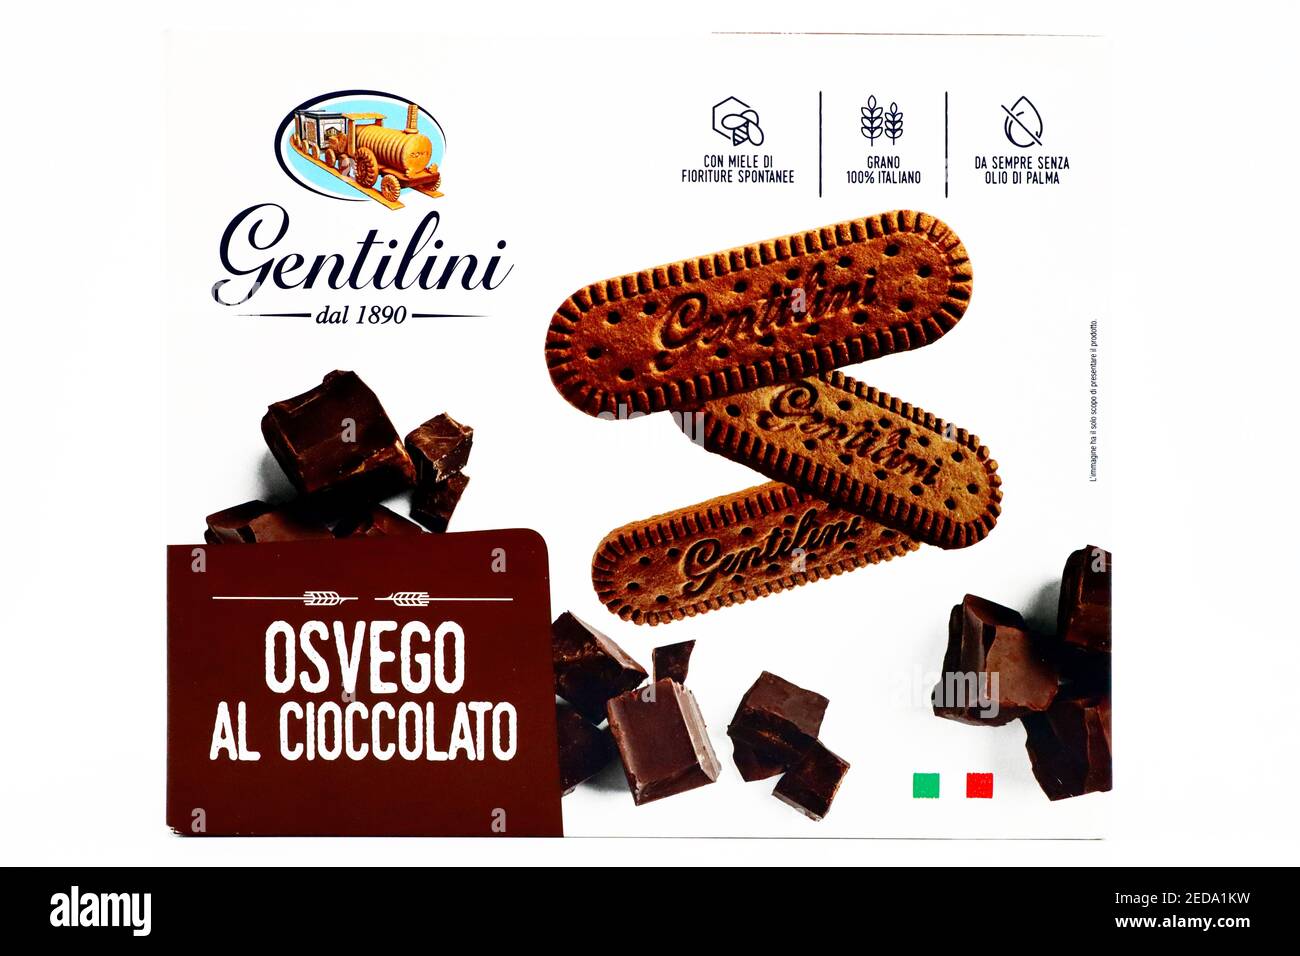 Osvego Chocolate Cookies produced in Italy by Gentilini Stock Photo